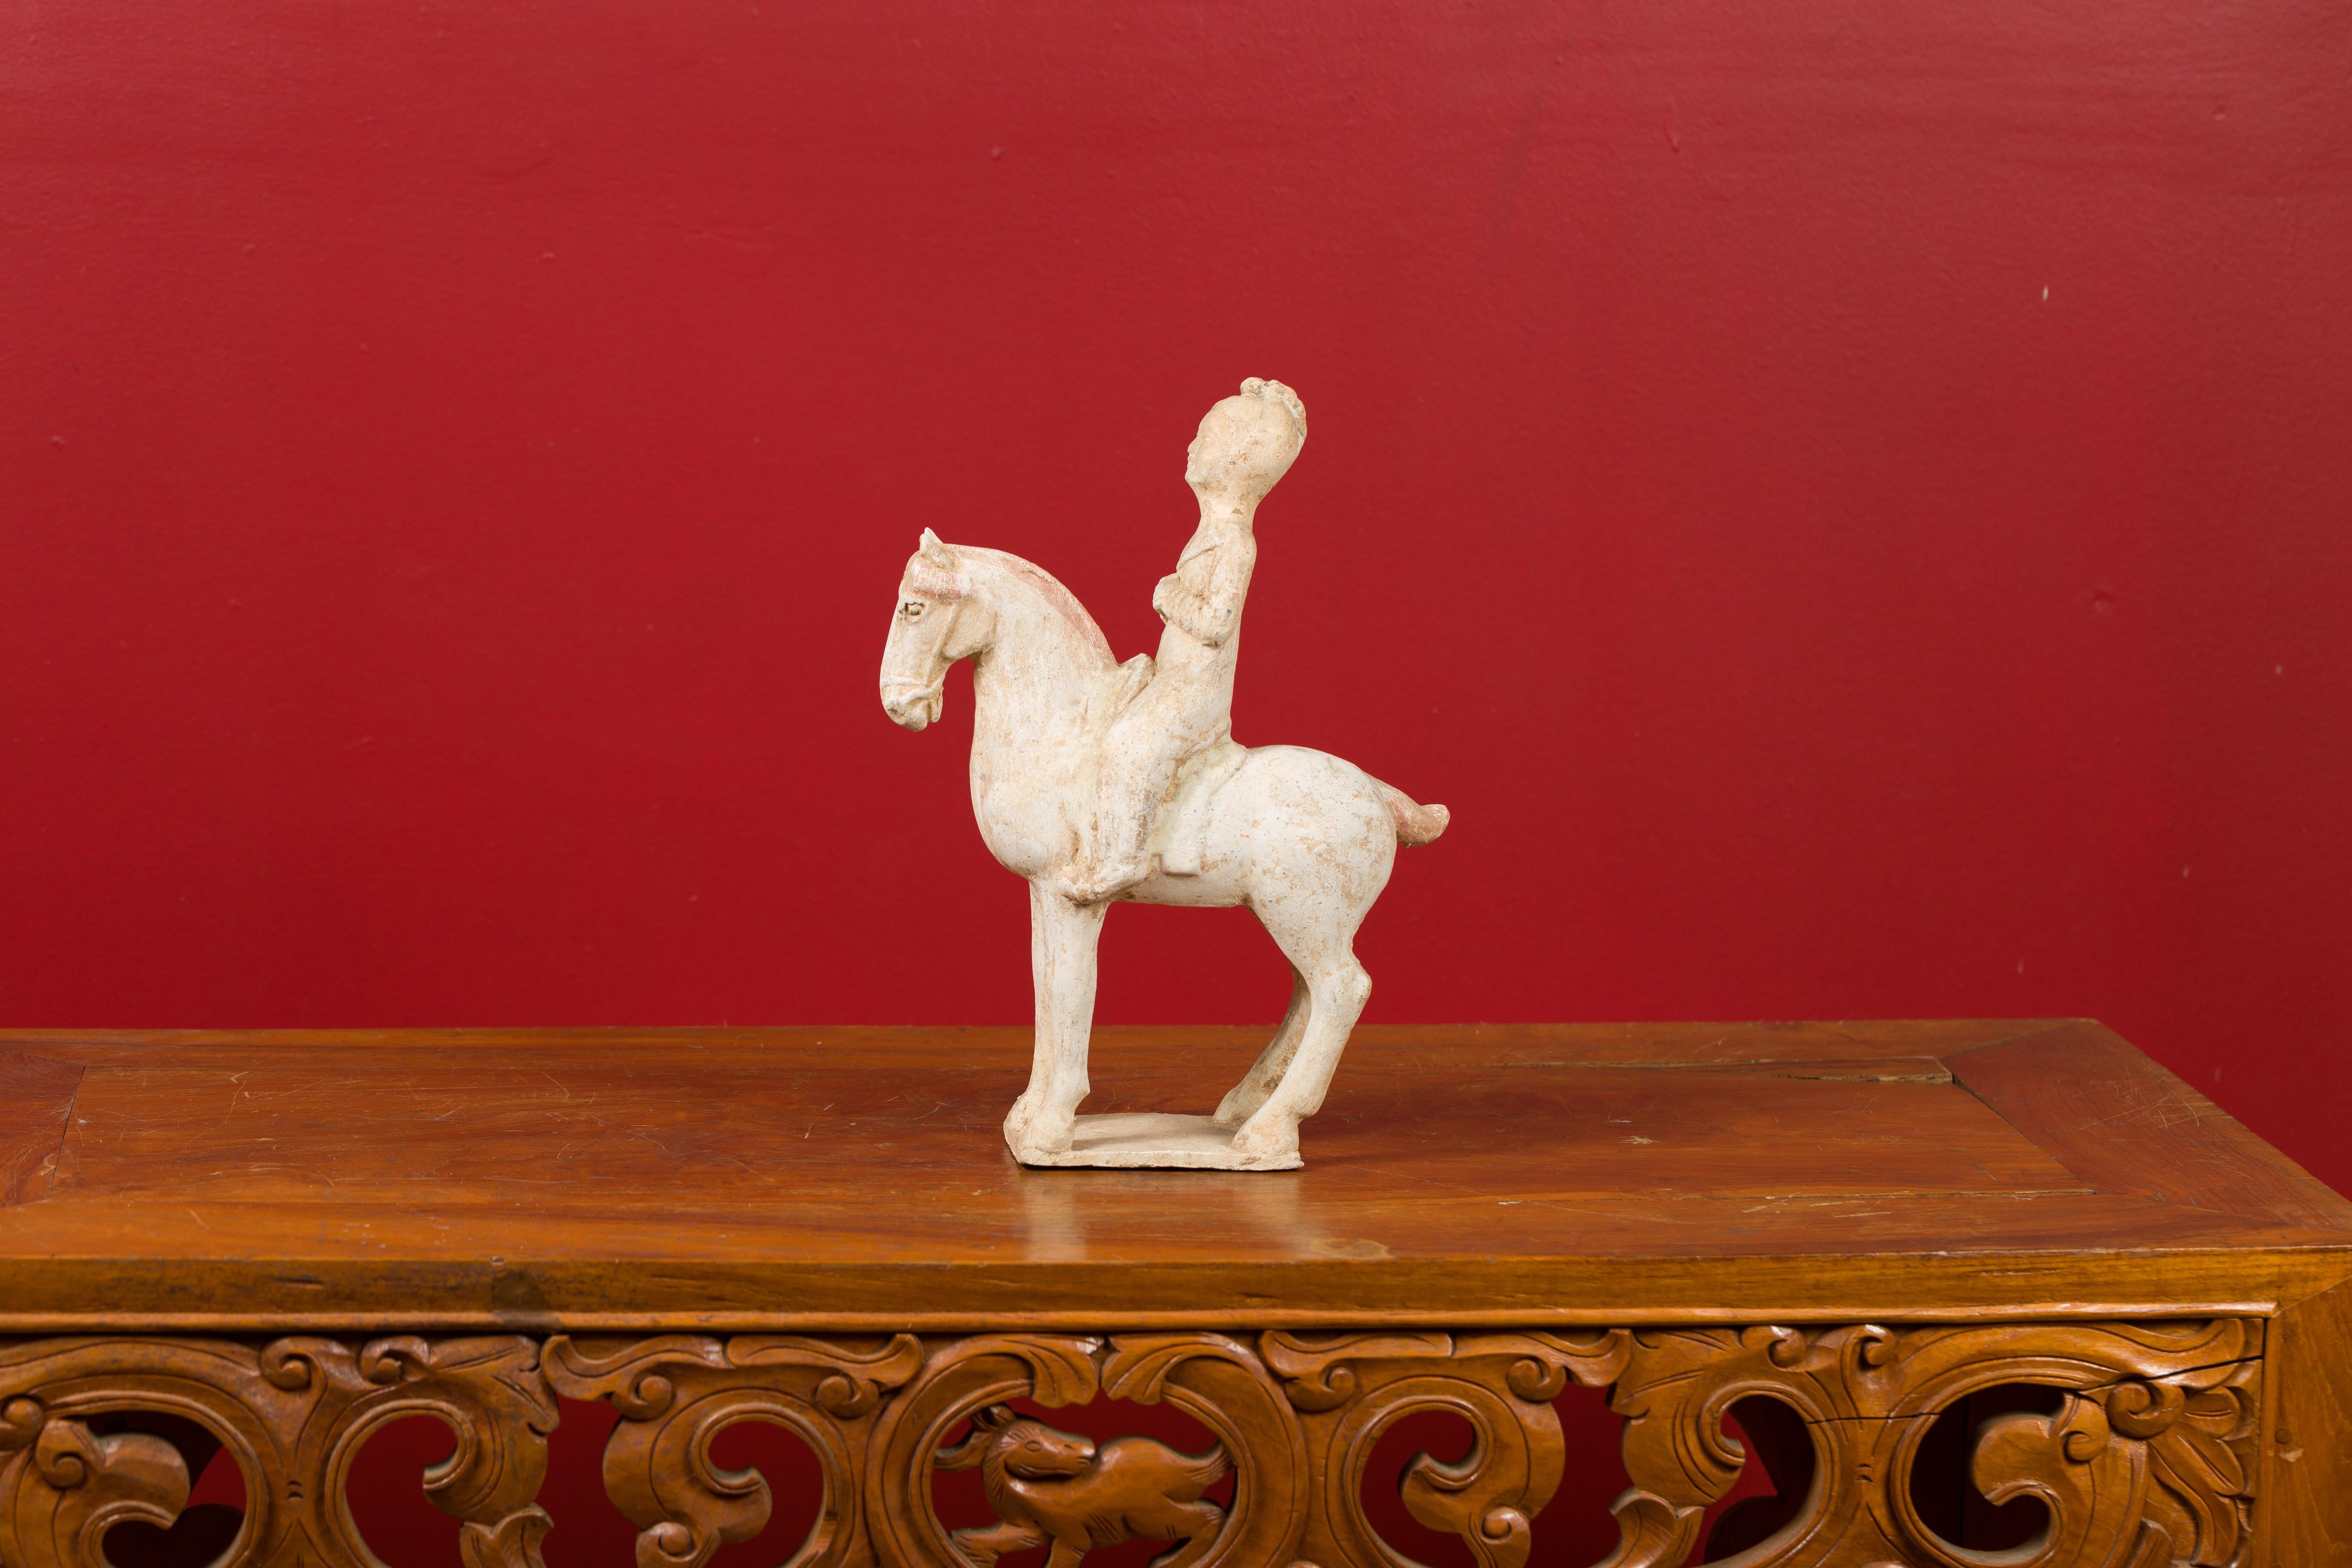 A Chinese Han Dynasty period painted terracotta statuette of a horse and rider, circa 202 BC-200 AD. Created in China during the prestigious Han Dynasty, this statuette, depicting a horse and his rider, showcases remnants of its original polychromy.